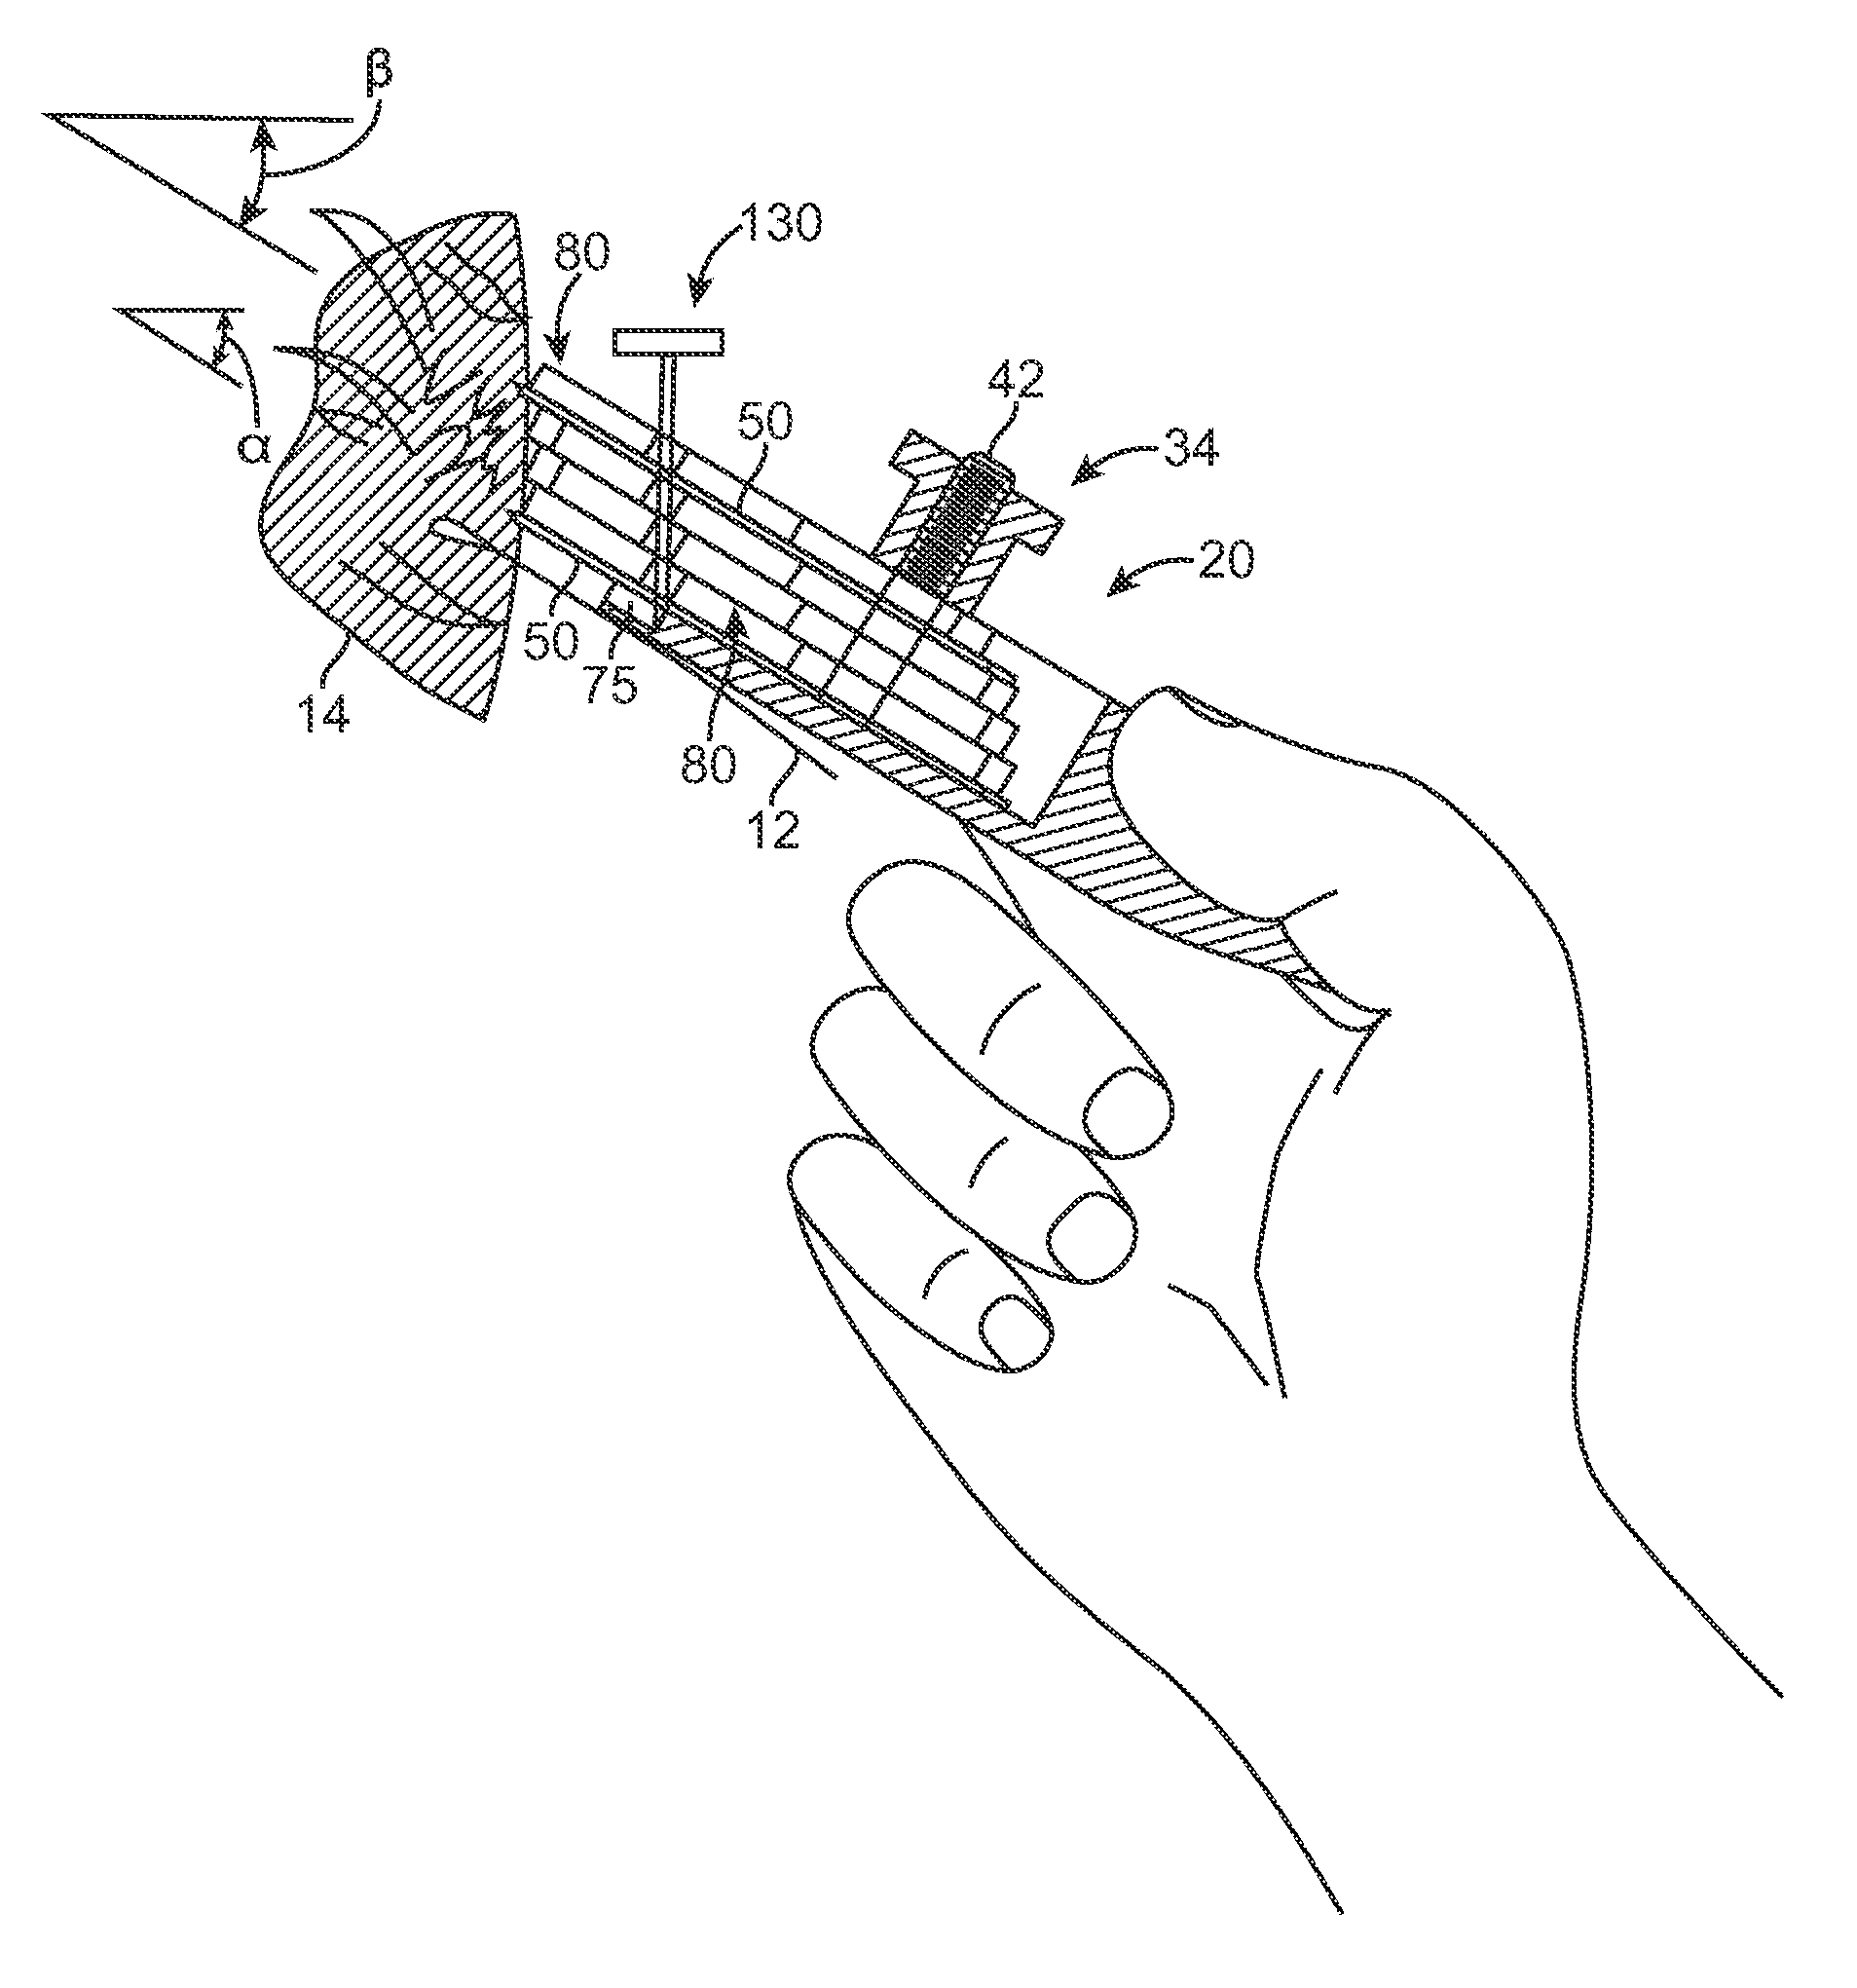 Multiple bladed surgical knife and method of use